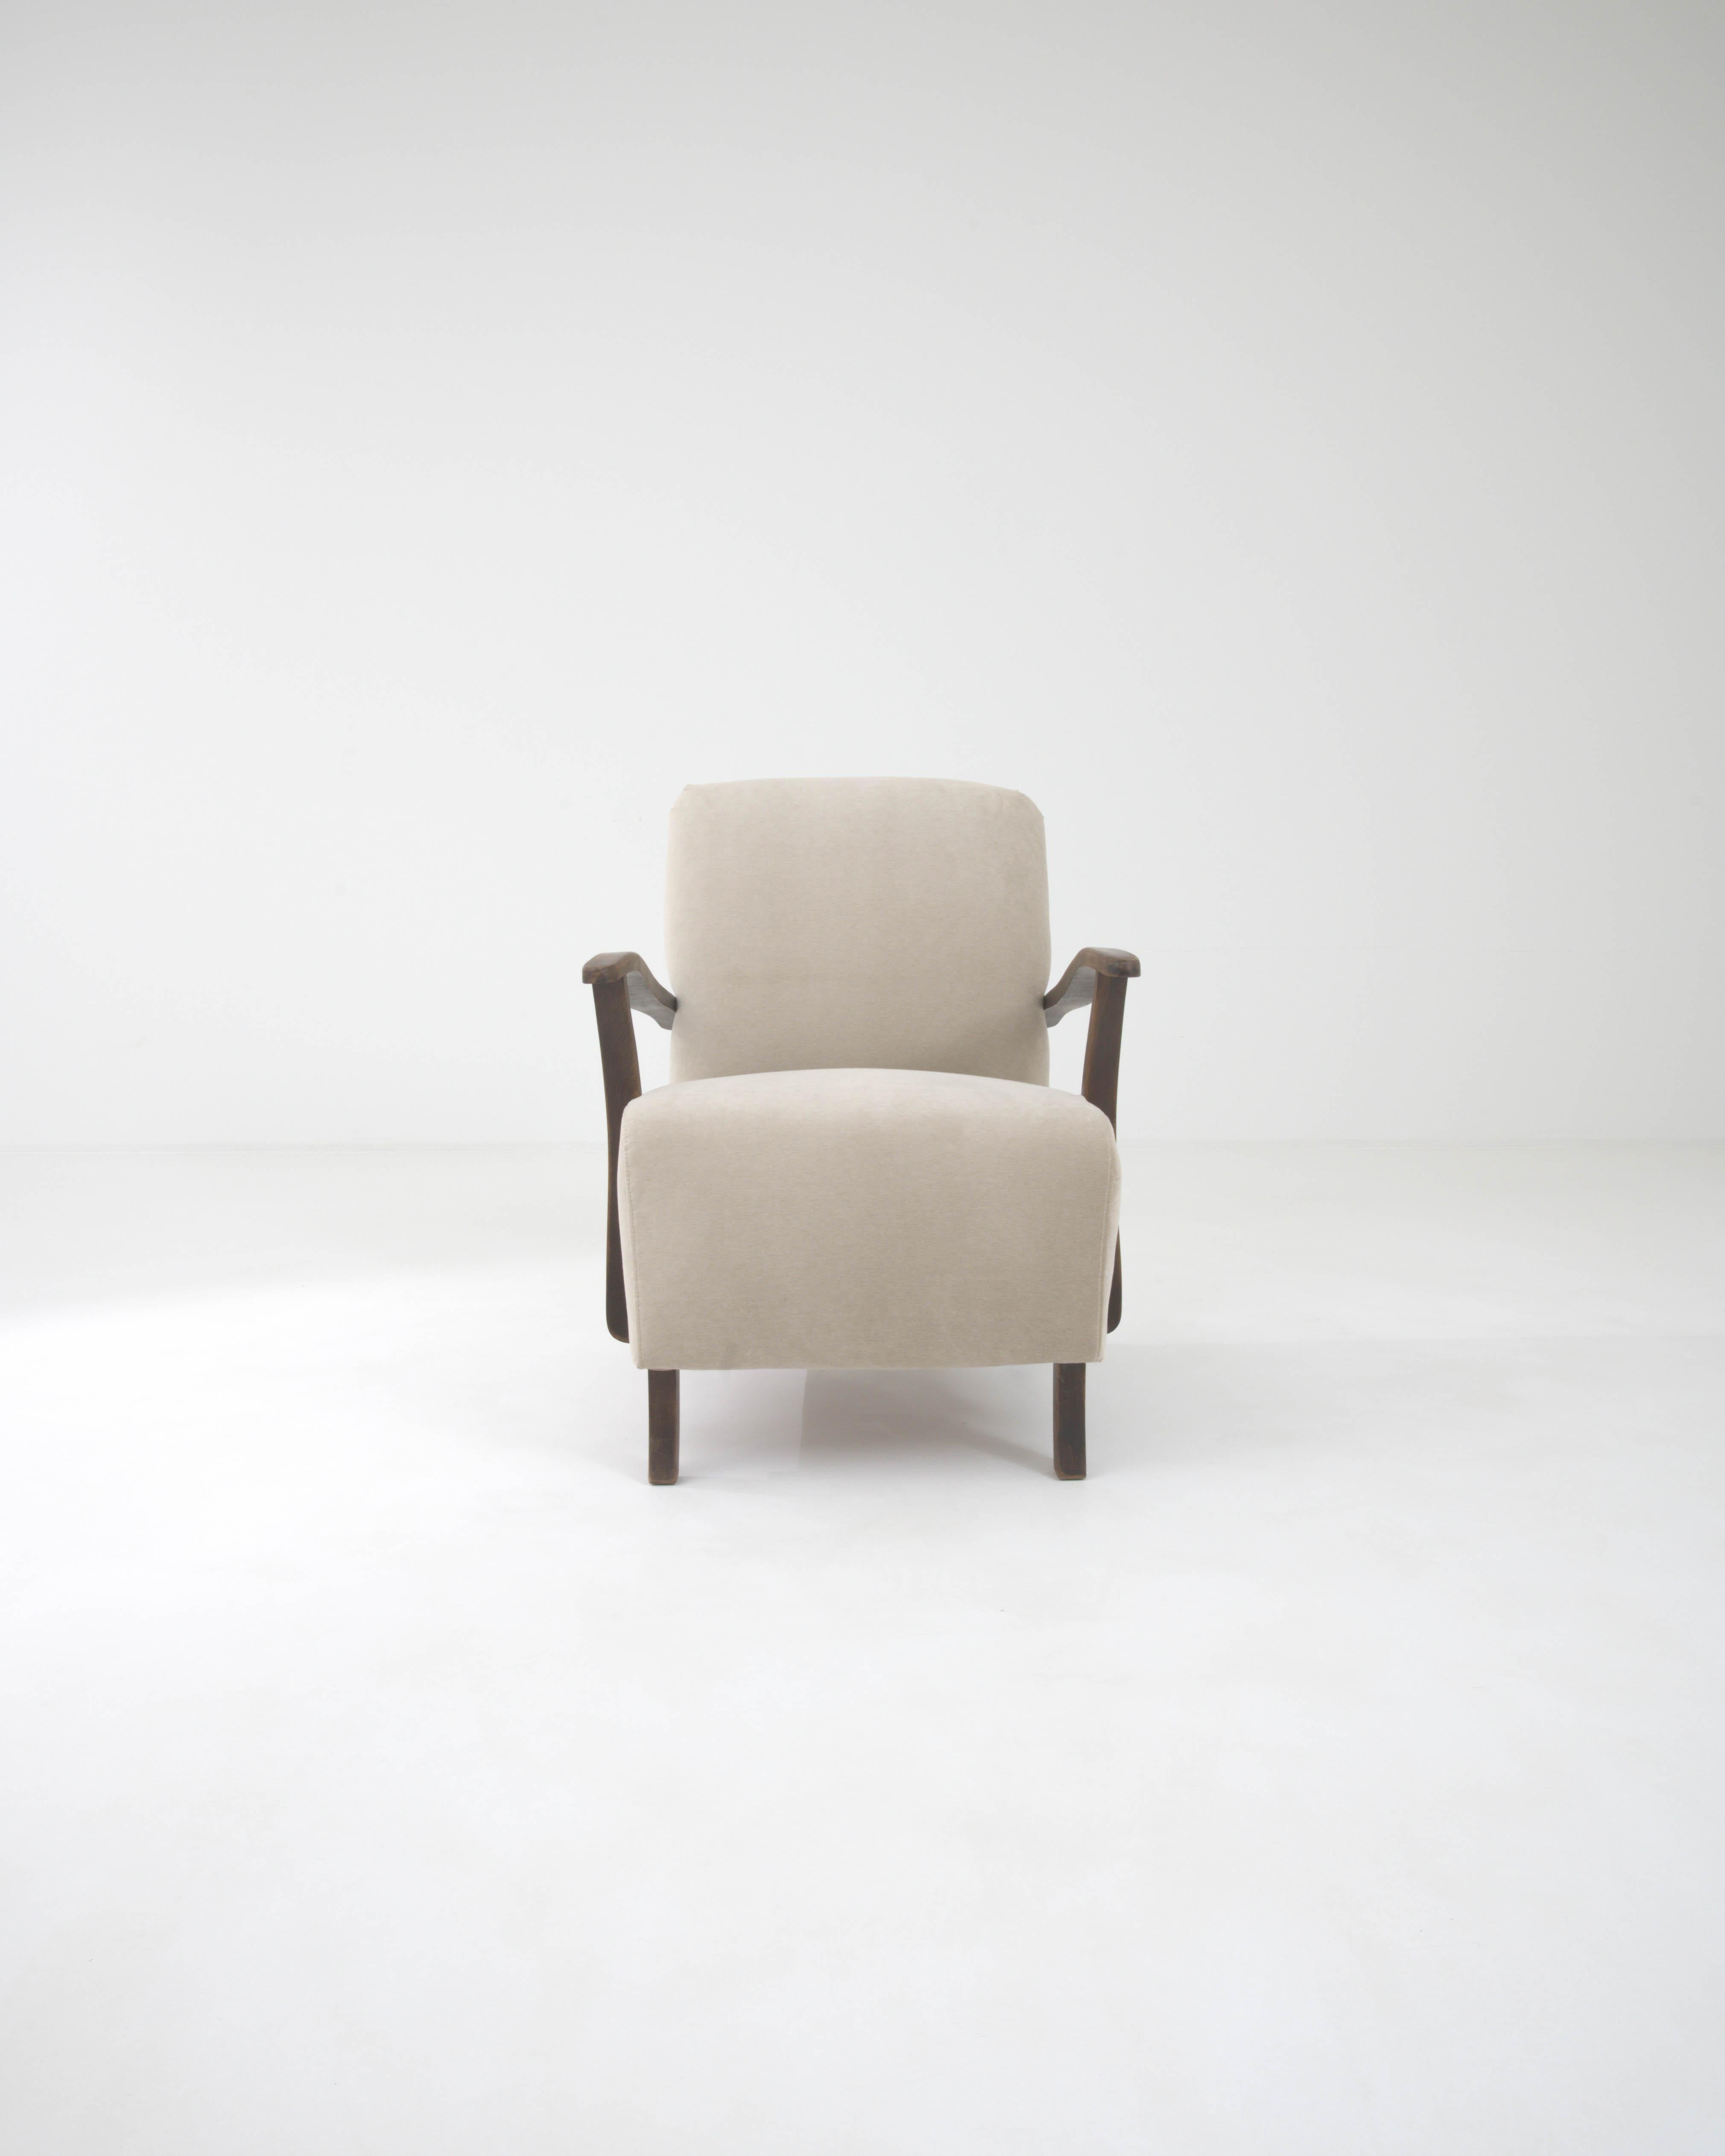 This mid-century modern armchair, crafted in Central Europe, is a medley of contrasts, defined by the stylish curves of the upholstery and the sleek angularity of the armrests and legs. Inclined armrests have a formal effect, giving this armchair a